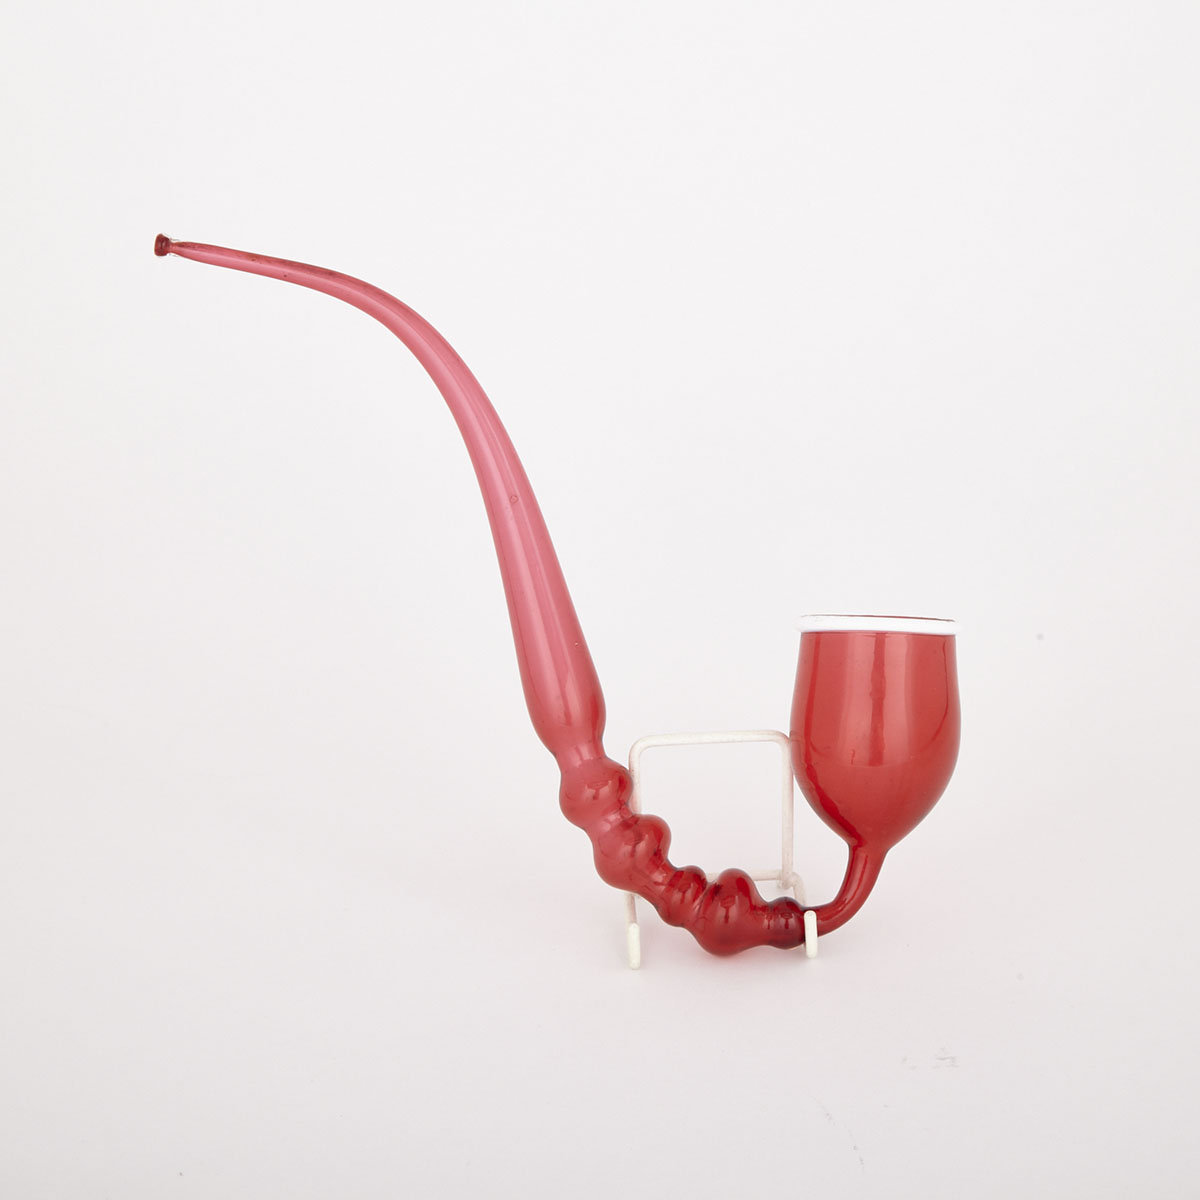 Nailsea-Type Red Glass Pipe Whimsy, 19th century